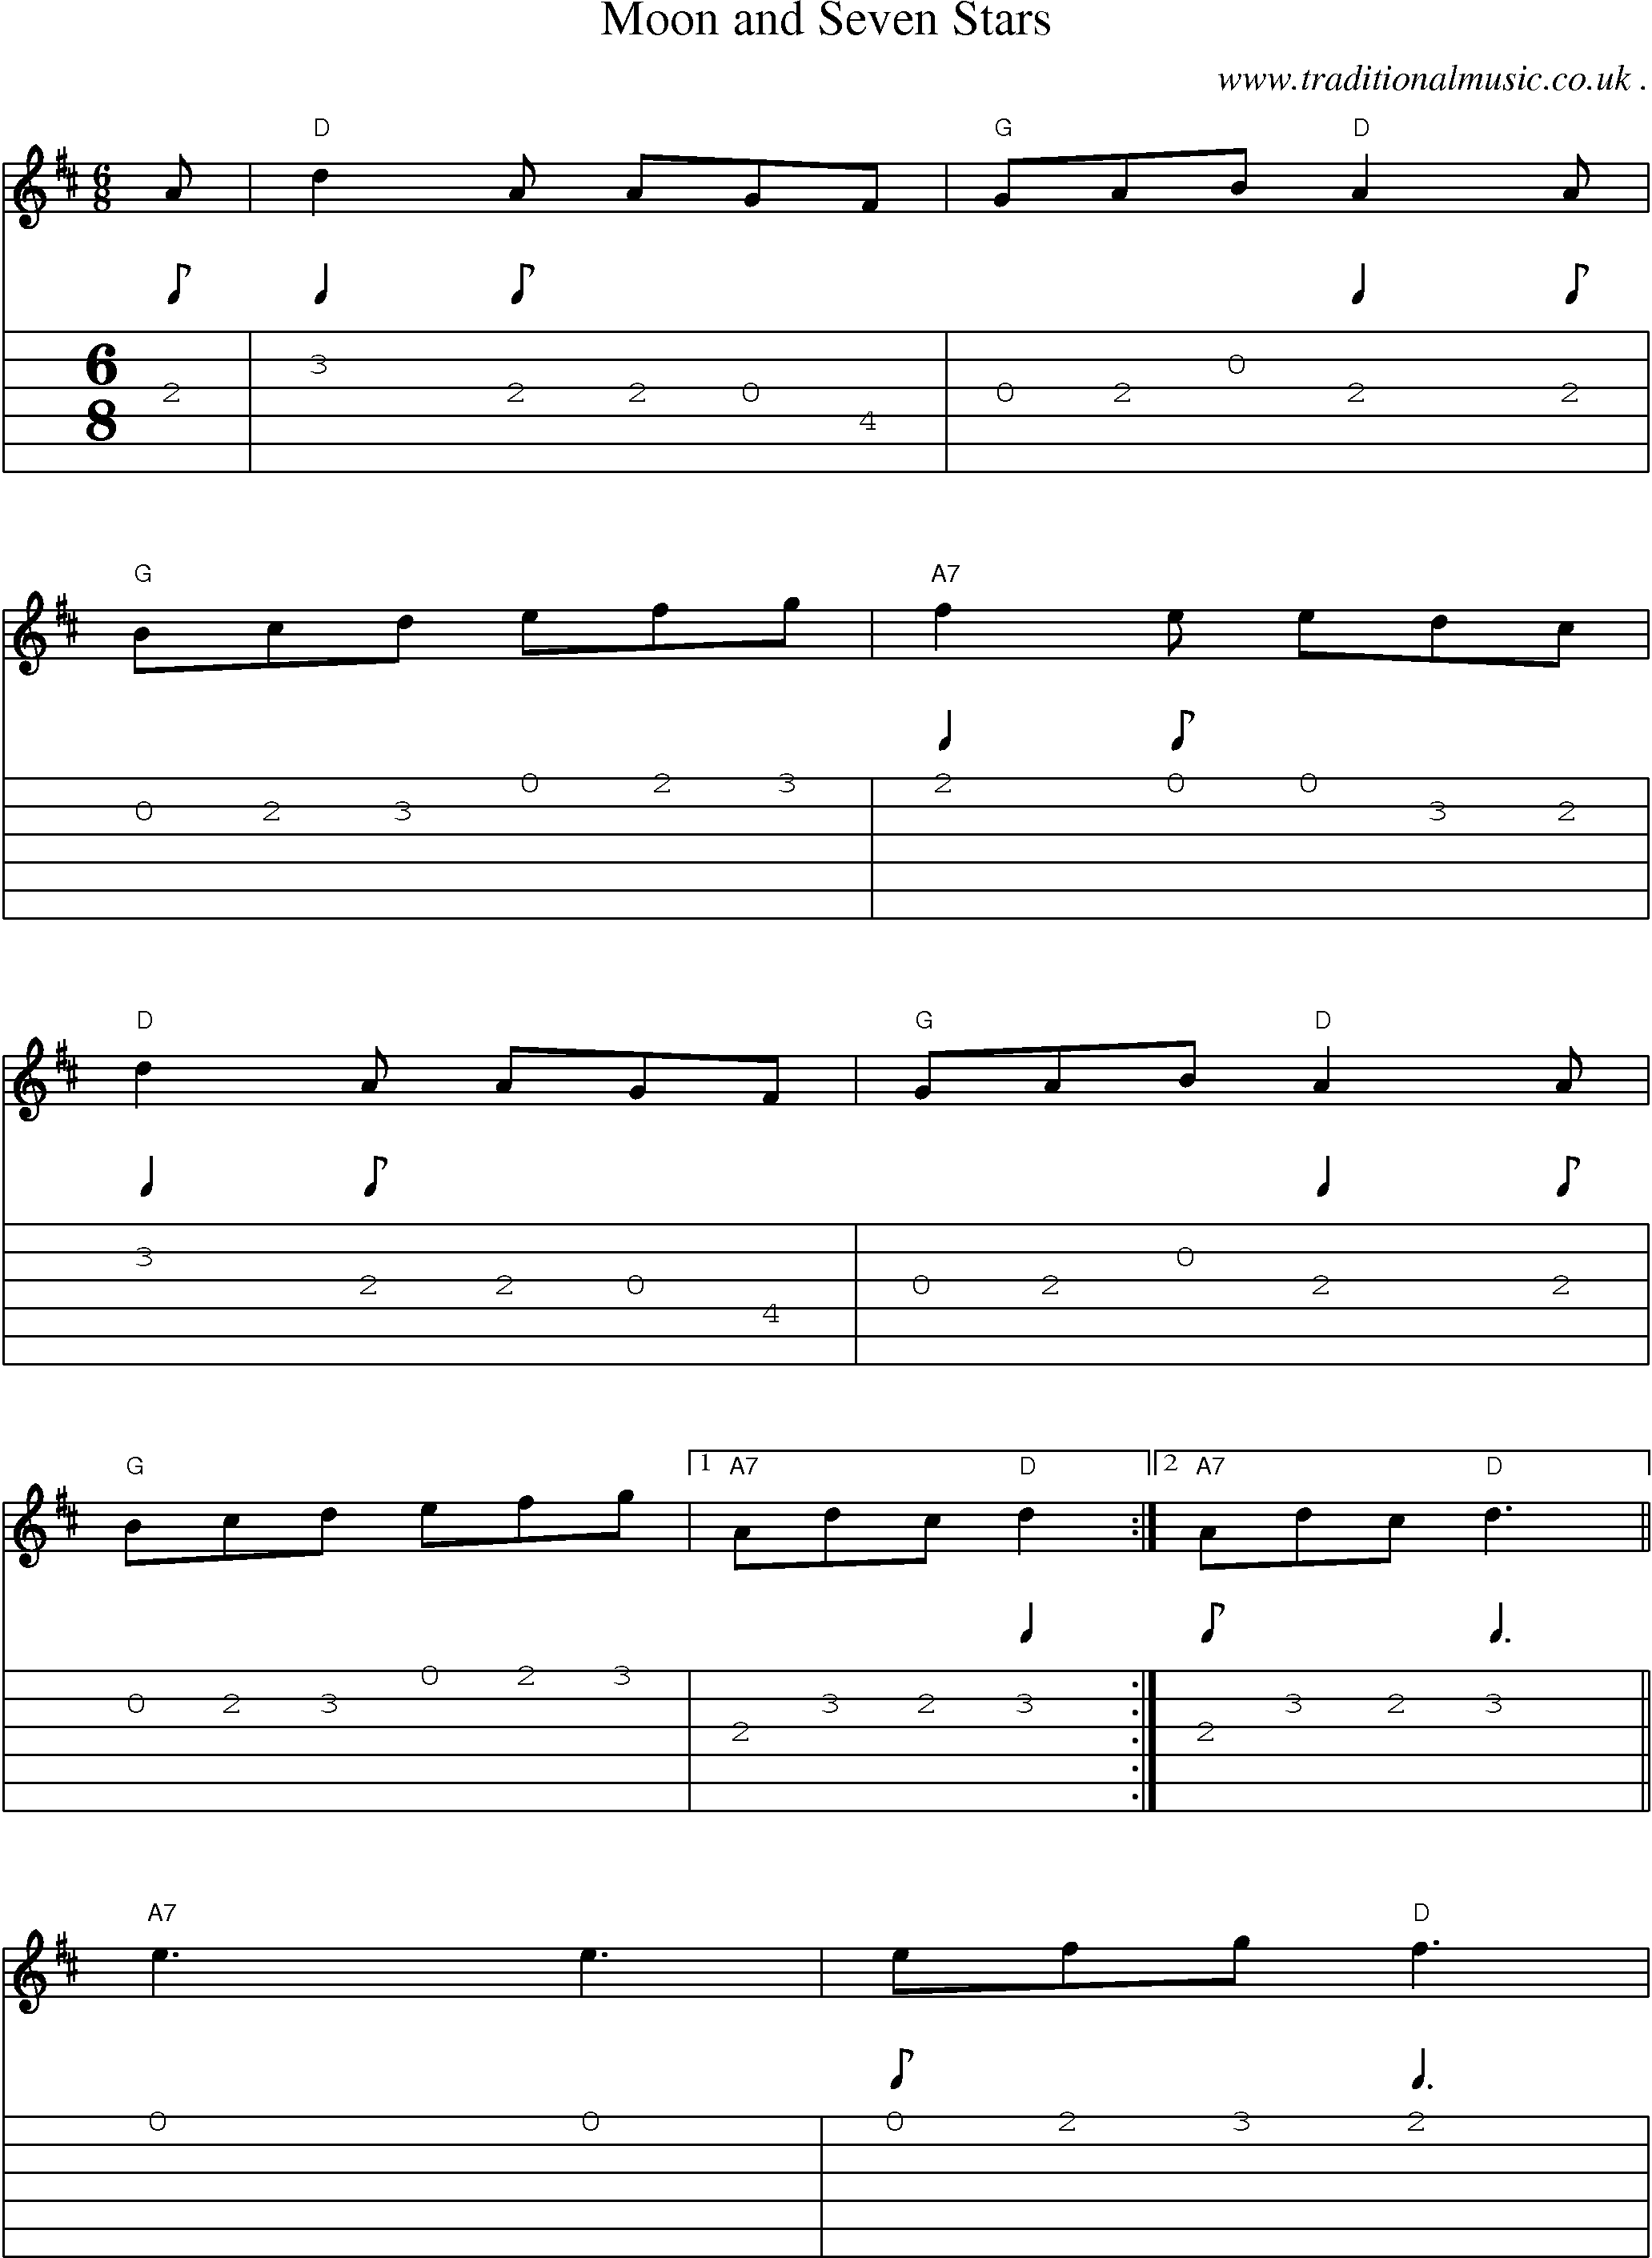 Music Score and Guitar Tabs for Moon And Seven Stars